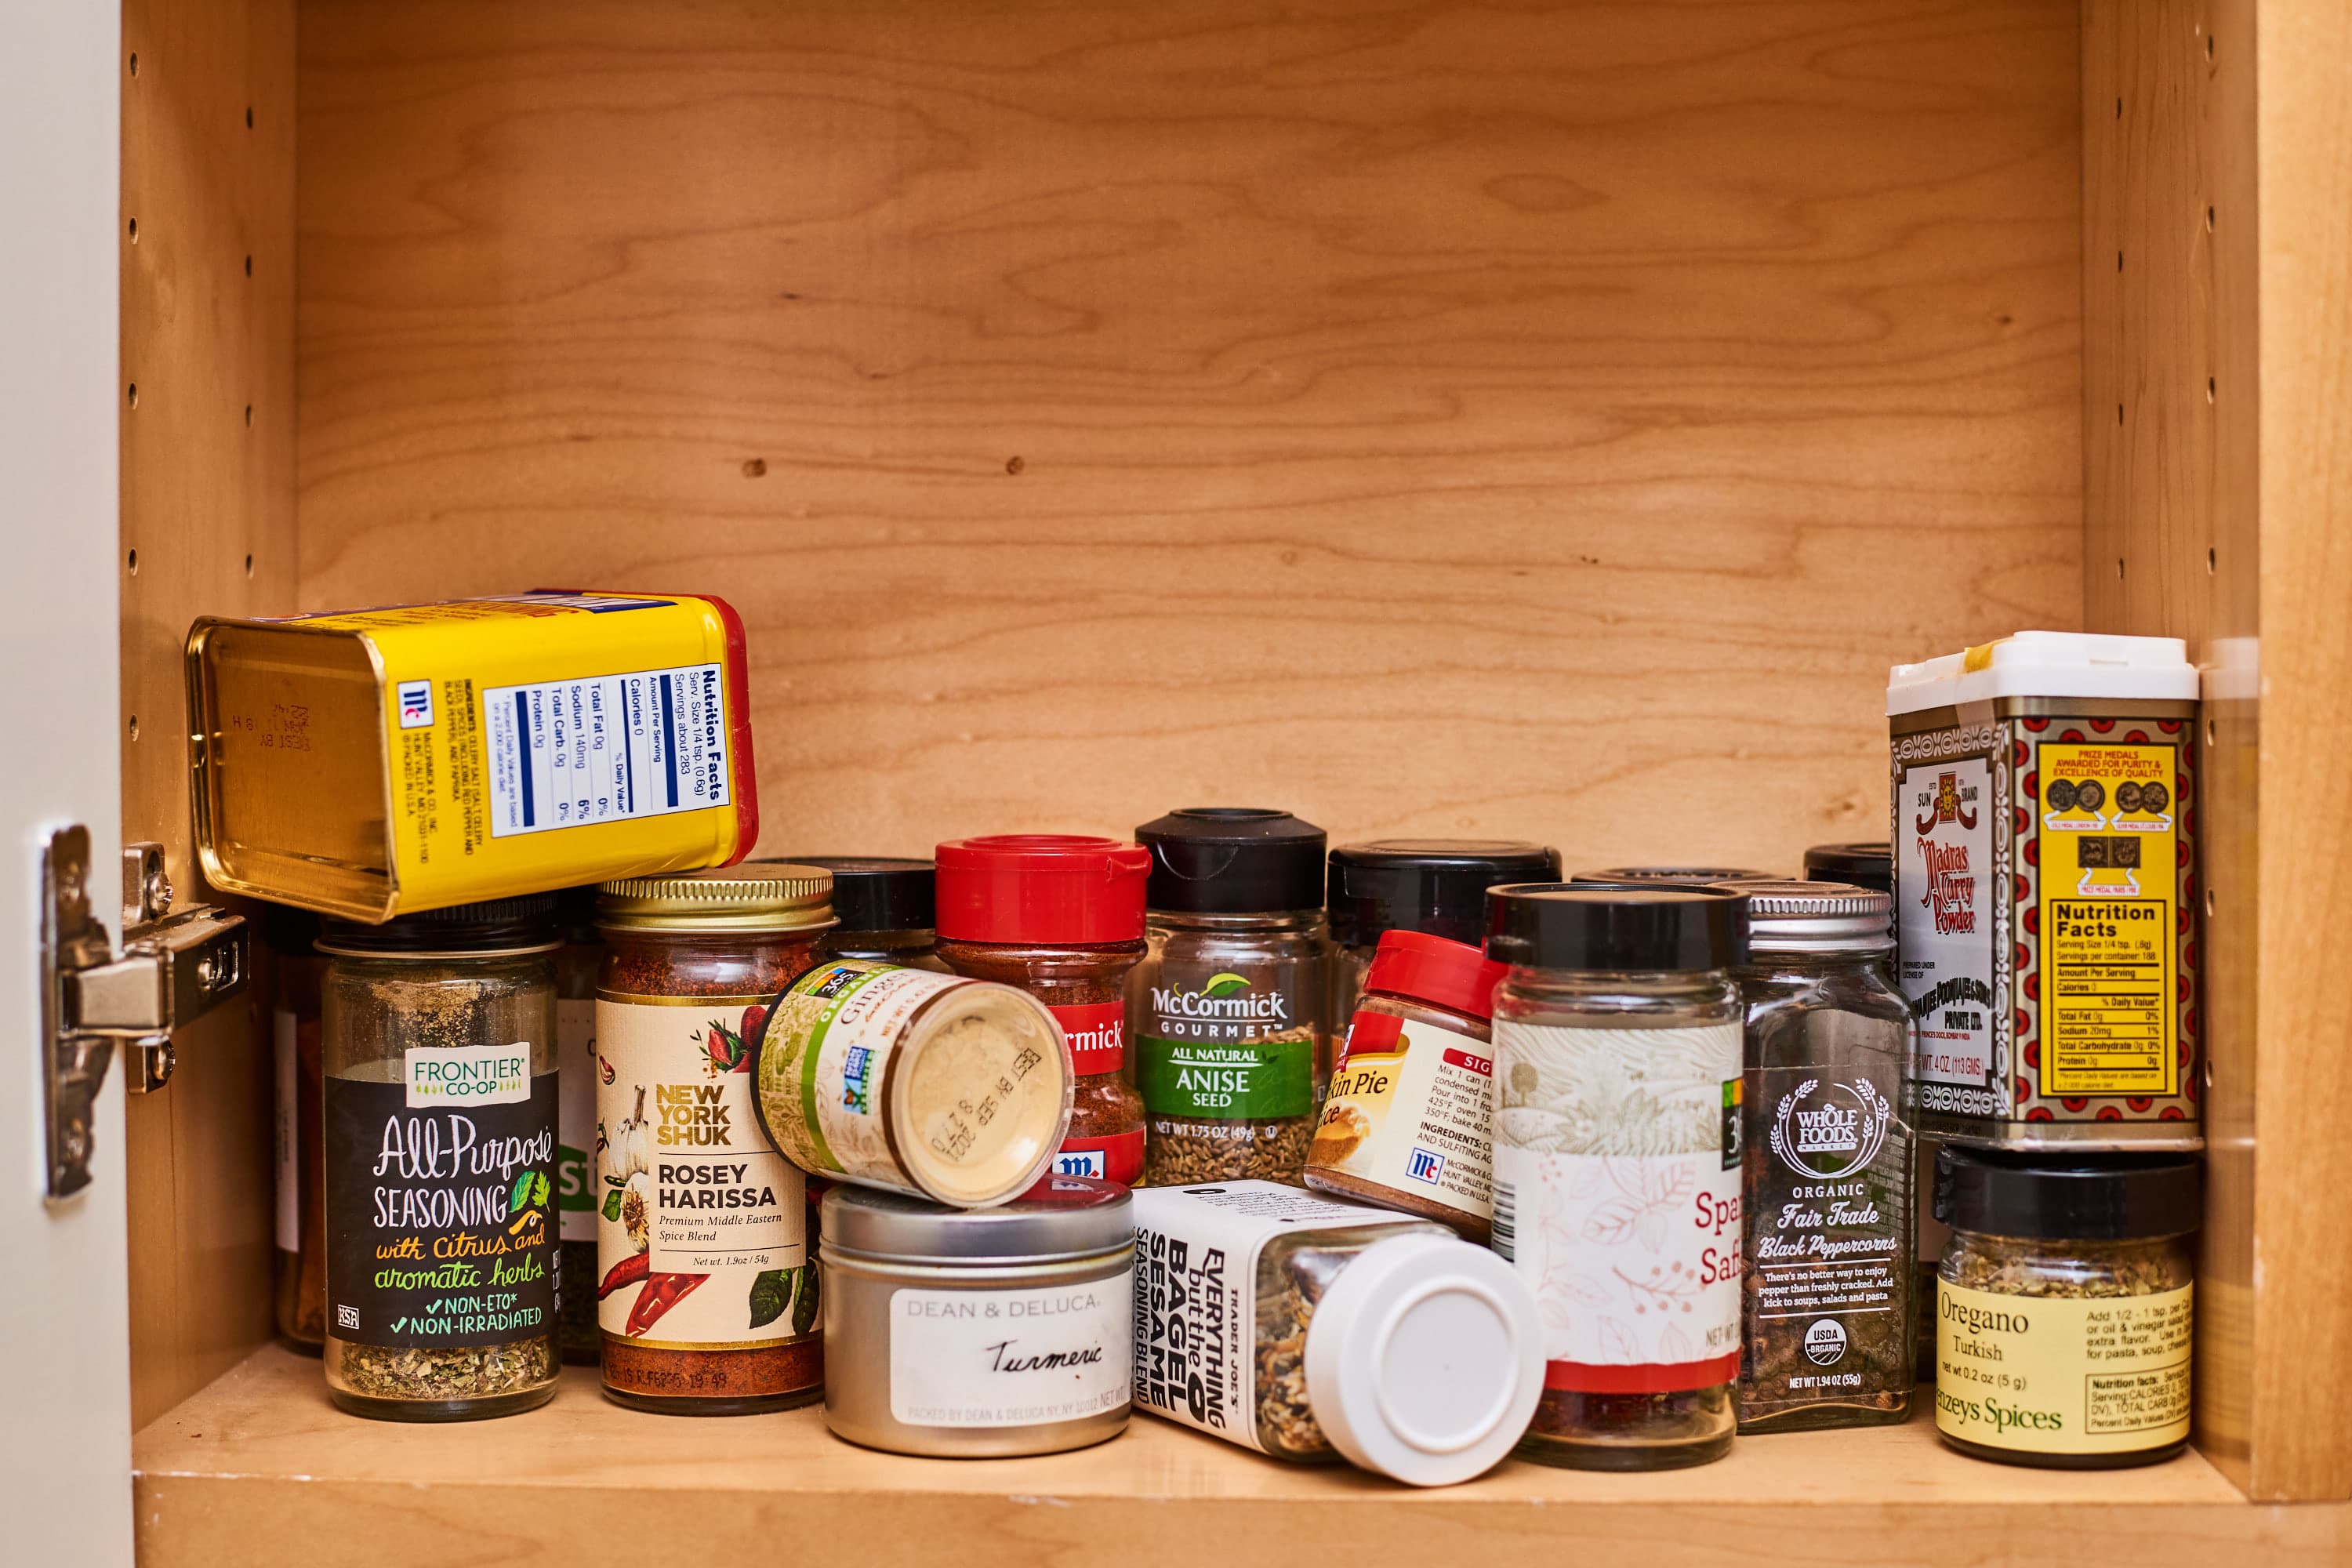 https://cdn.apartmenttherapy.info/image/upload/v1572635599/k/Photo/Lifestyle/2019-11-The-Simple-Yet-Surprising-Way-a-Tension-Rod-Can-Help-You-Organize-Your-Spices/2019-10-28_Kitchn90125_Tension-Rod-Hack.jpg